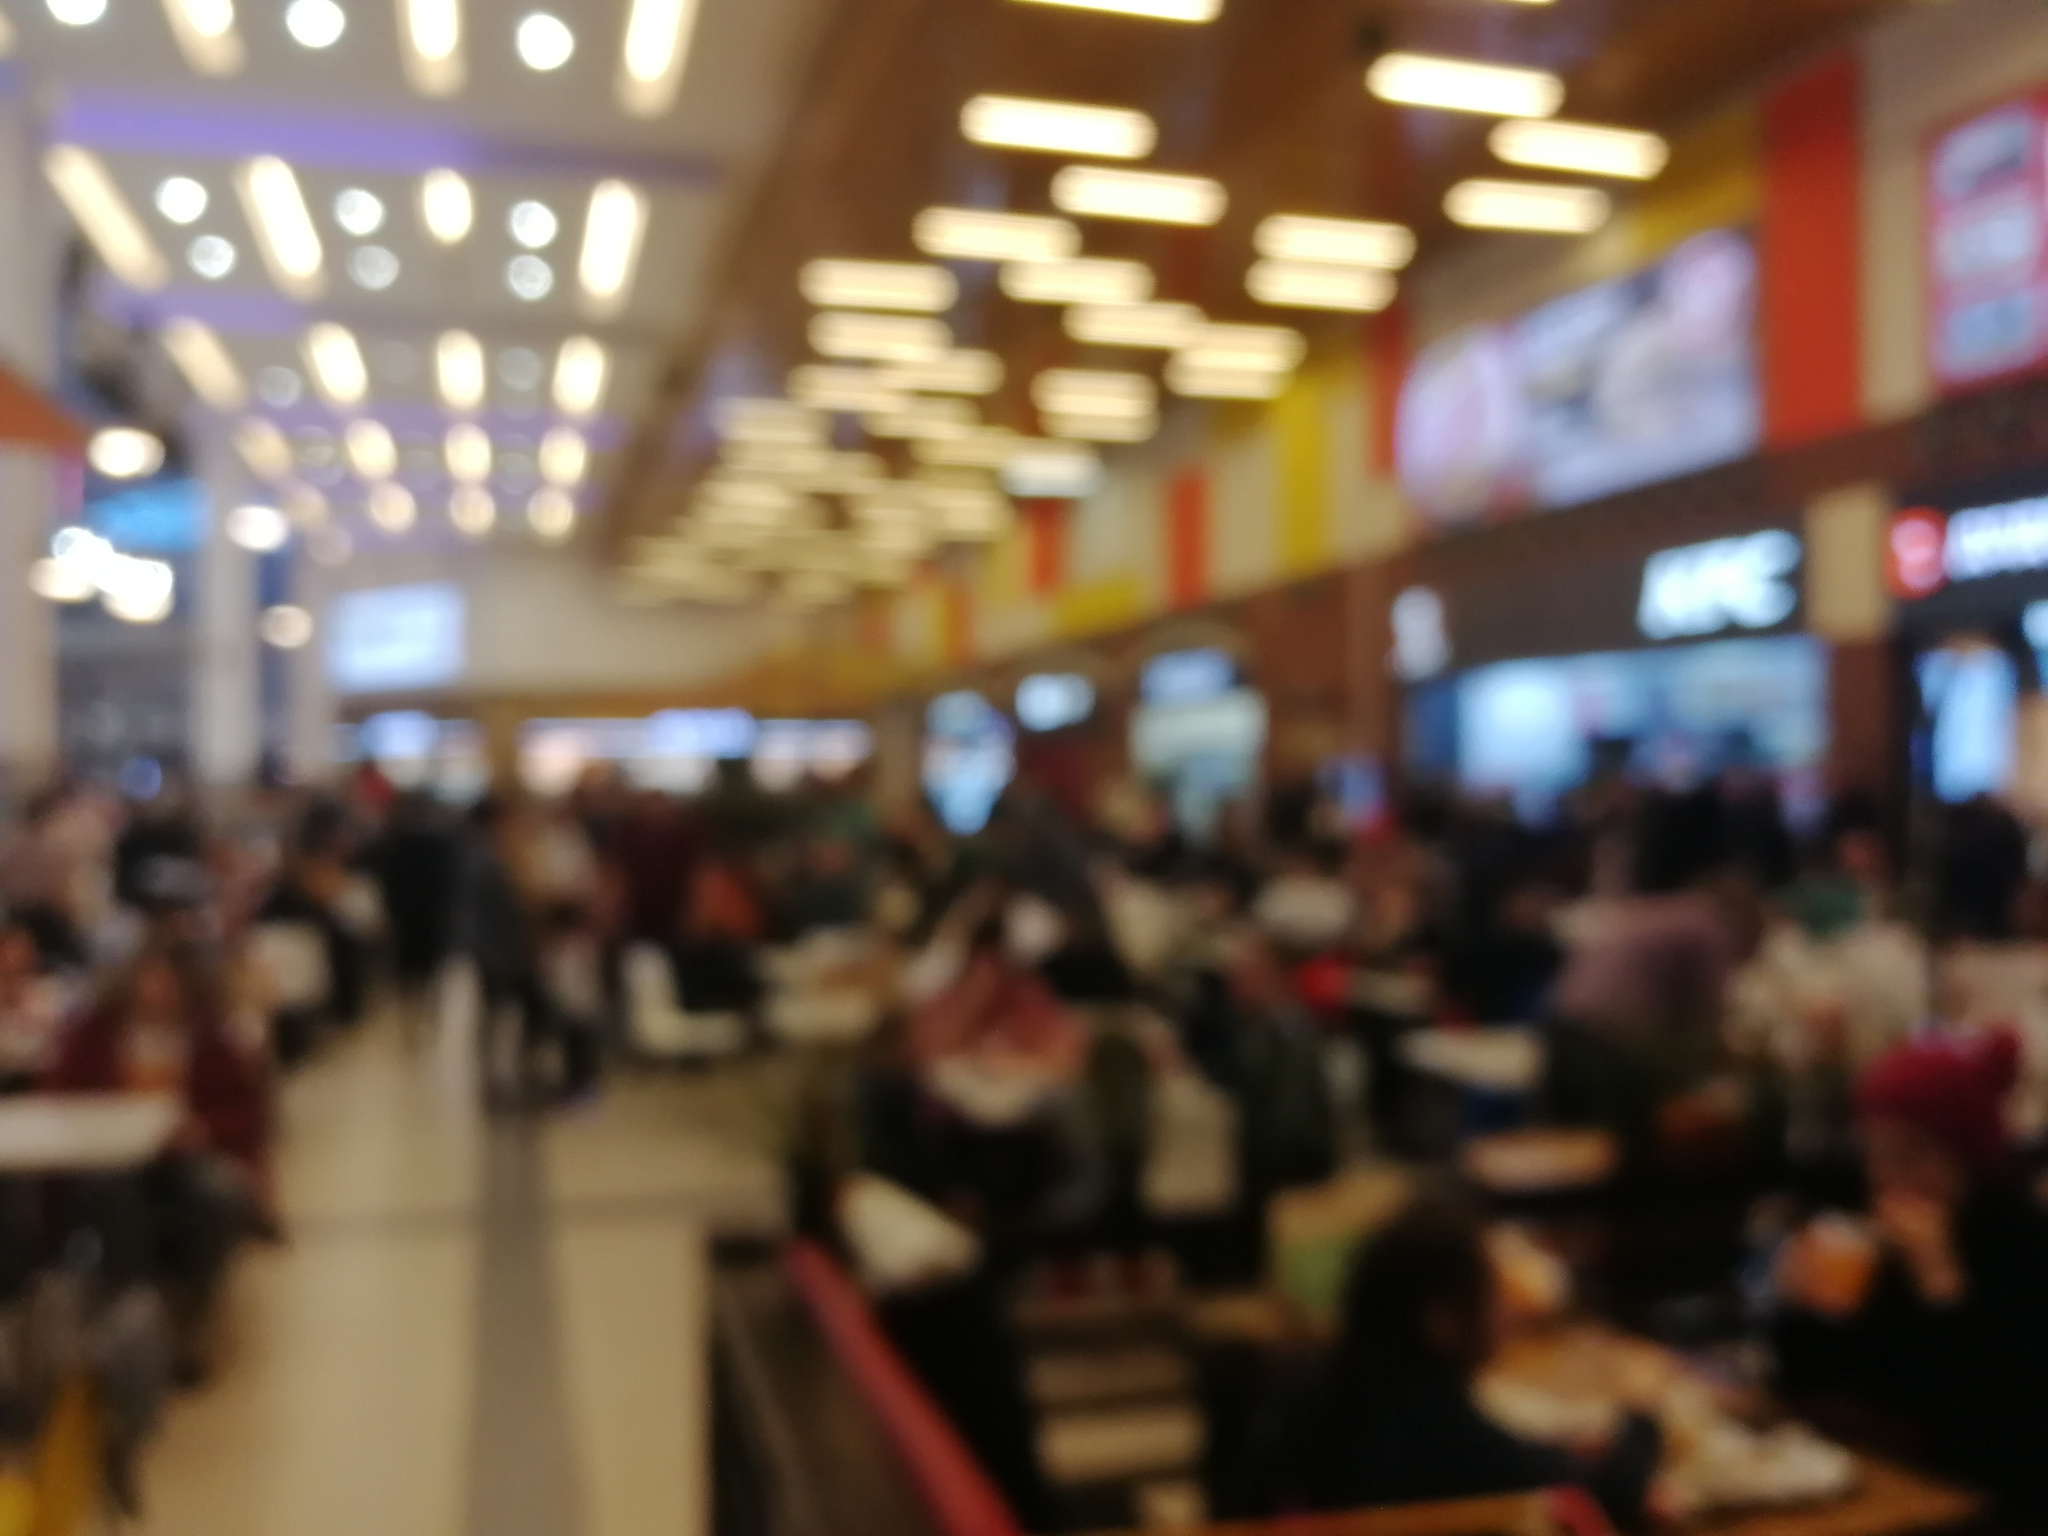 Blurred background. Food court of mall.